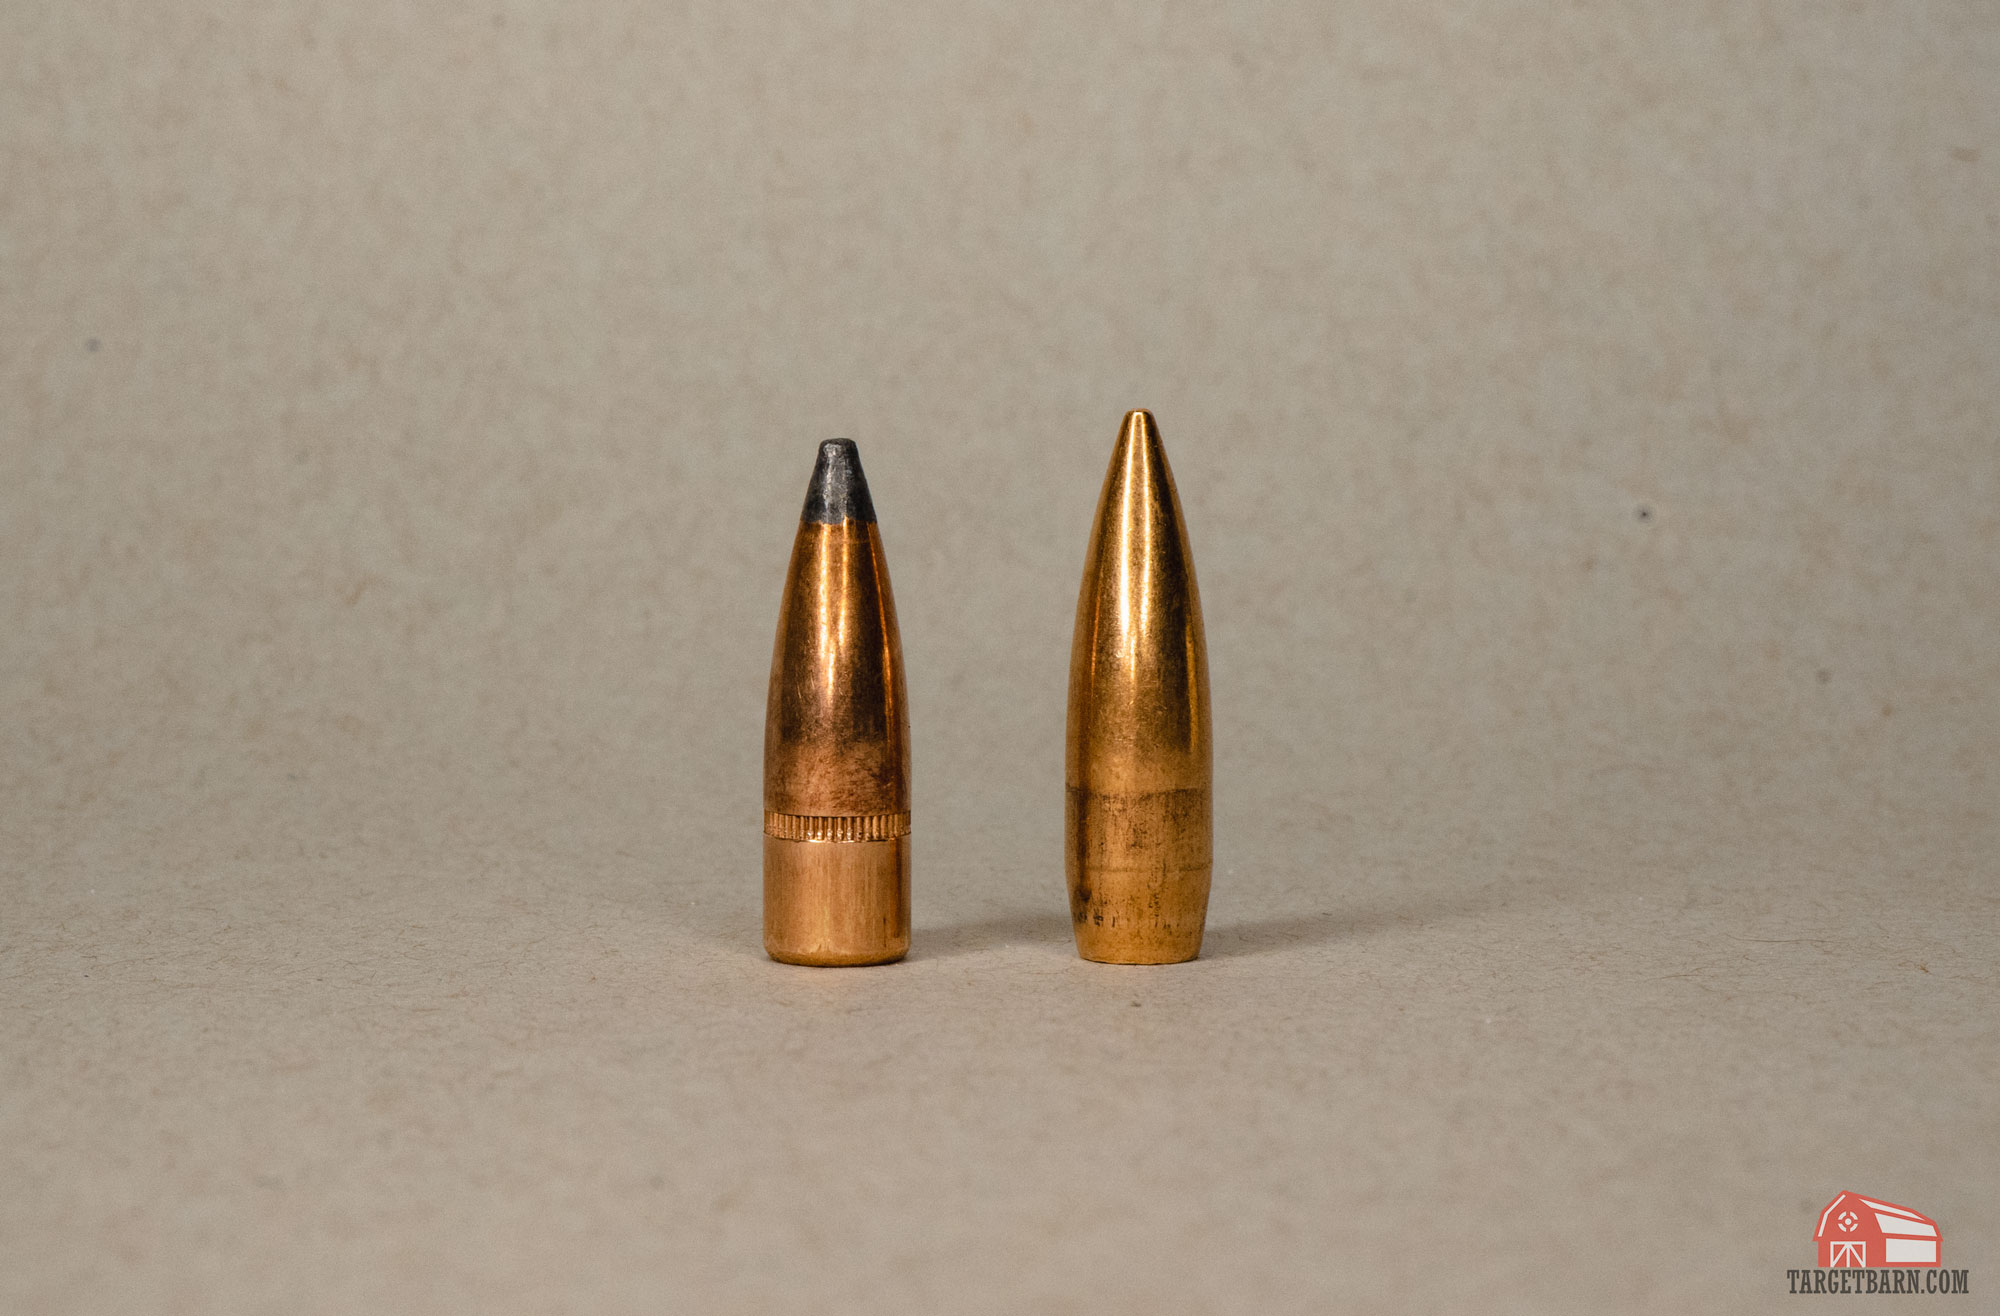 What's A Boat Tail Bullet? --- Any Advantages To Them?